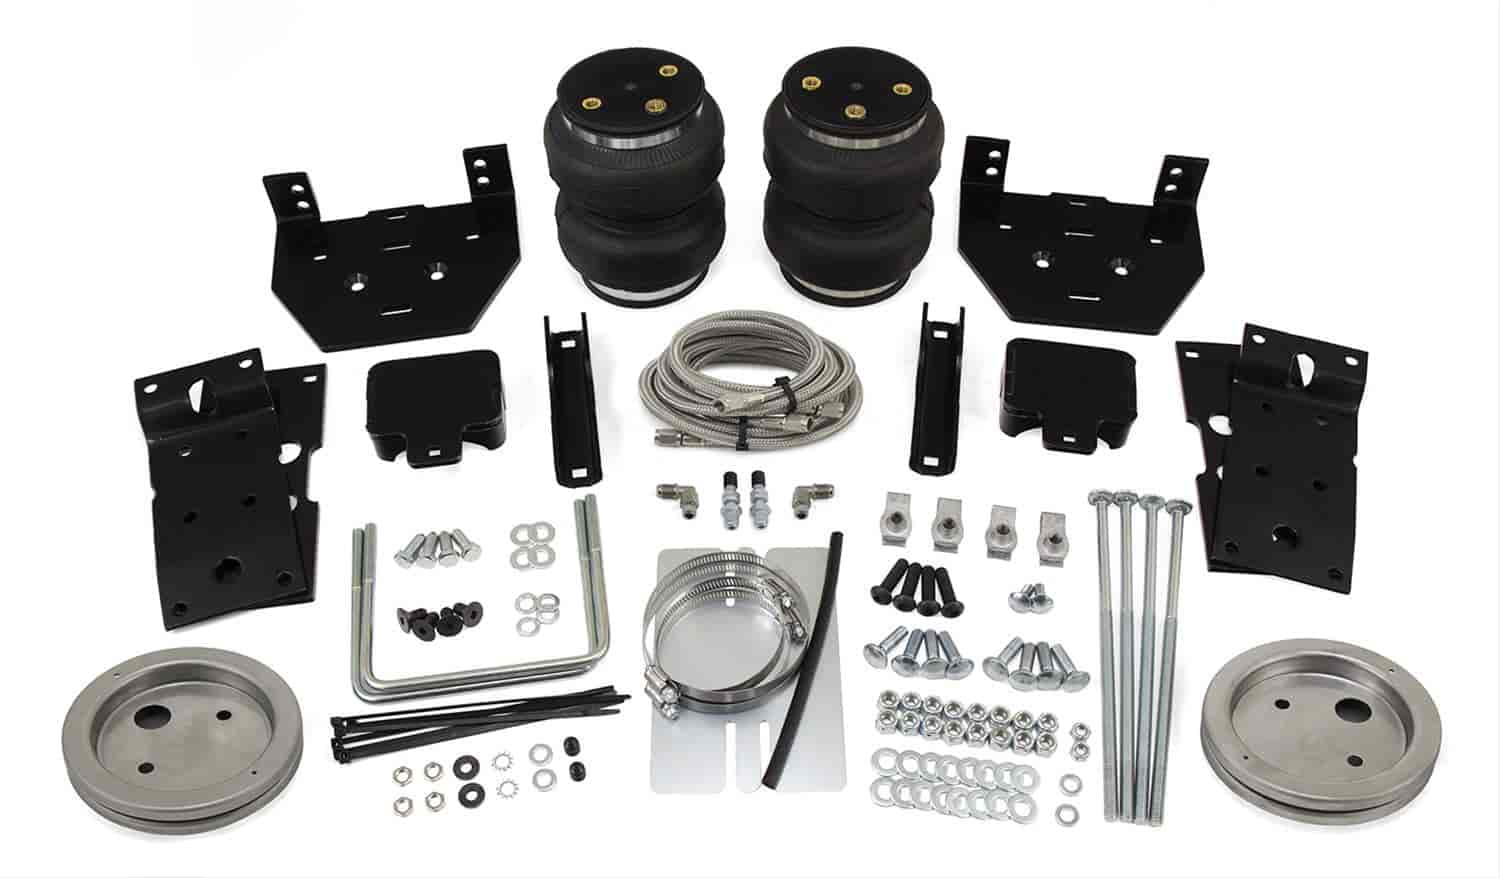 LoadLifter 5000 Rear Kit for 2017-Up Ford F-250/F-350/F-450